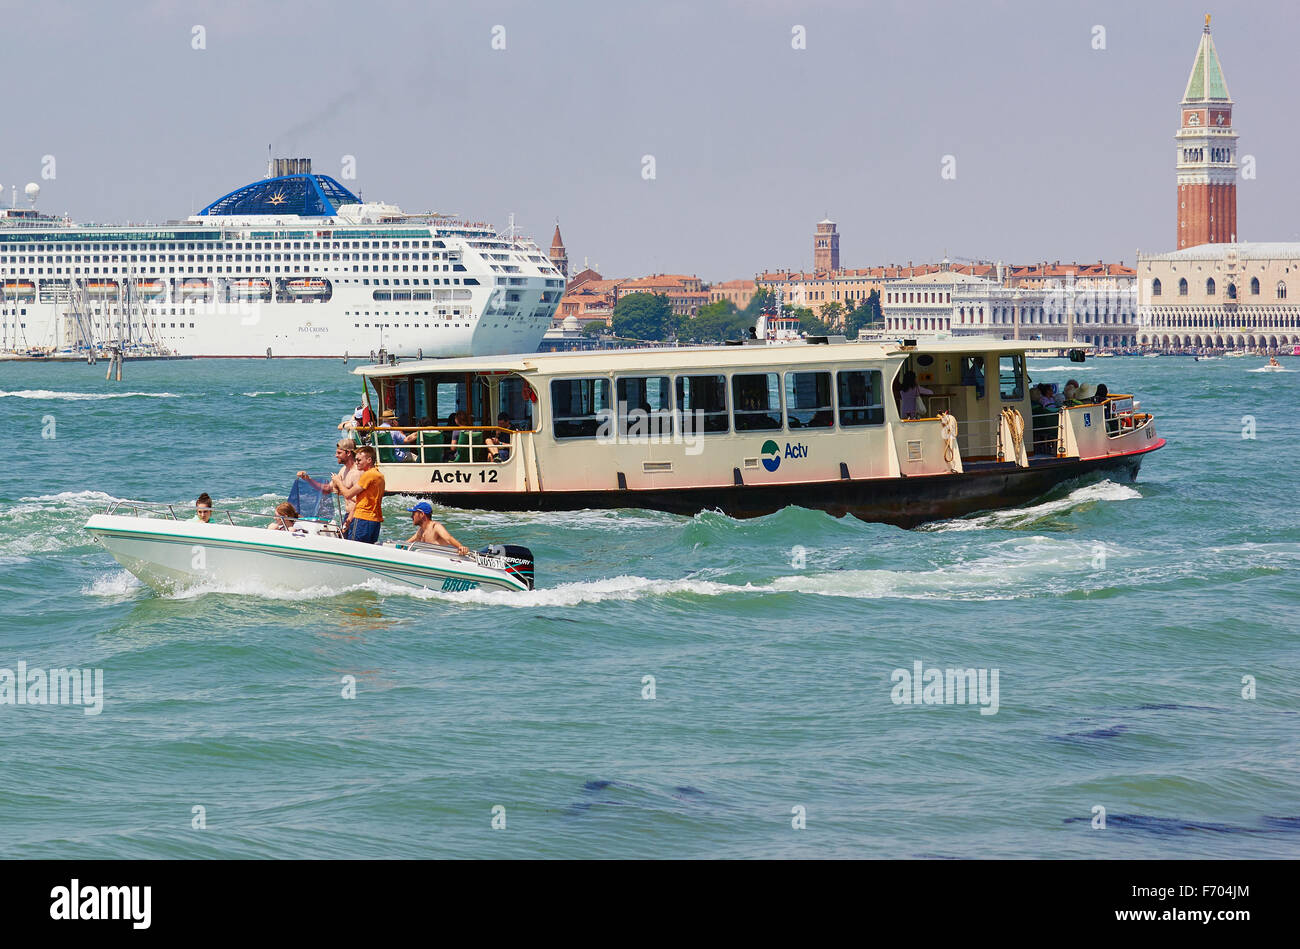 Giant cruise liner crossing the Venetian Lagoon with vaporetto waterbus in the foreground Venice Veneto Italy Europe Stock Photo